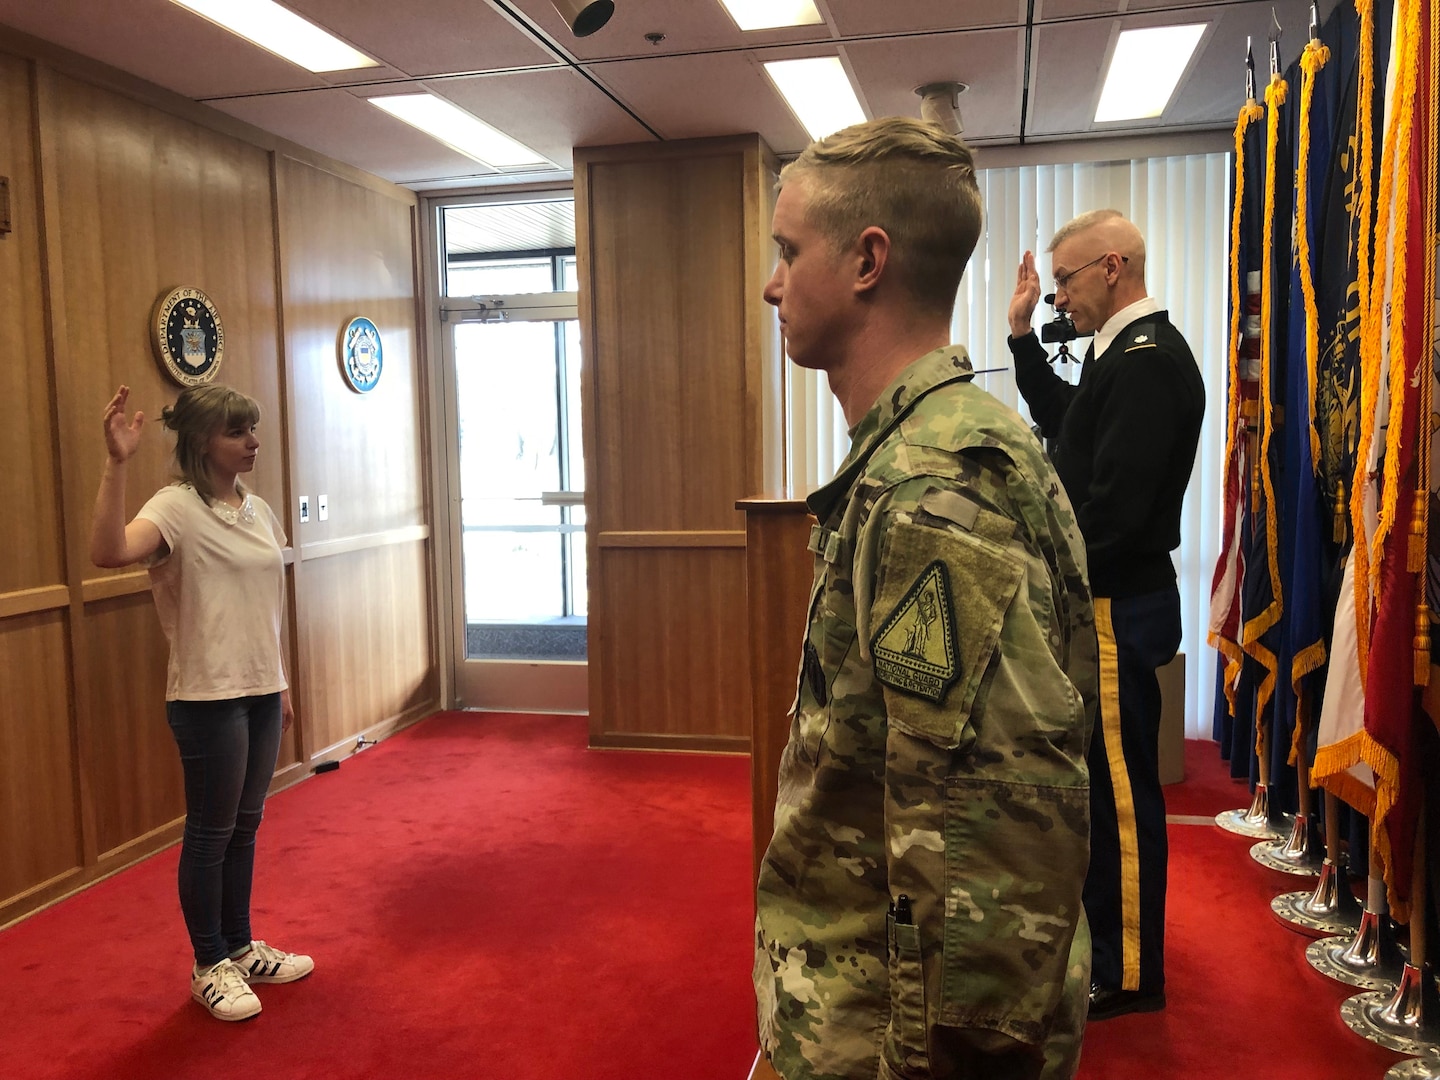 Lt. Col. David Darney administers the oath of enlistment to his daughter, Pvt. Sarah Darney, Dec. 27, 2018, at the Boise Military Entrance Processing Station.